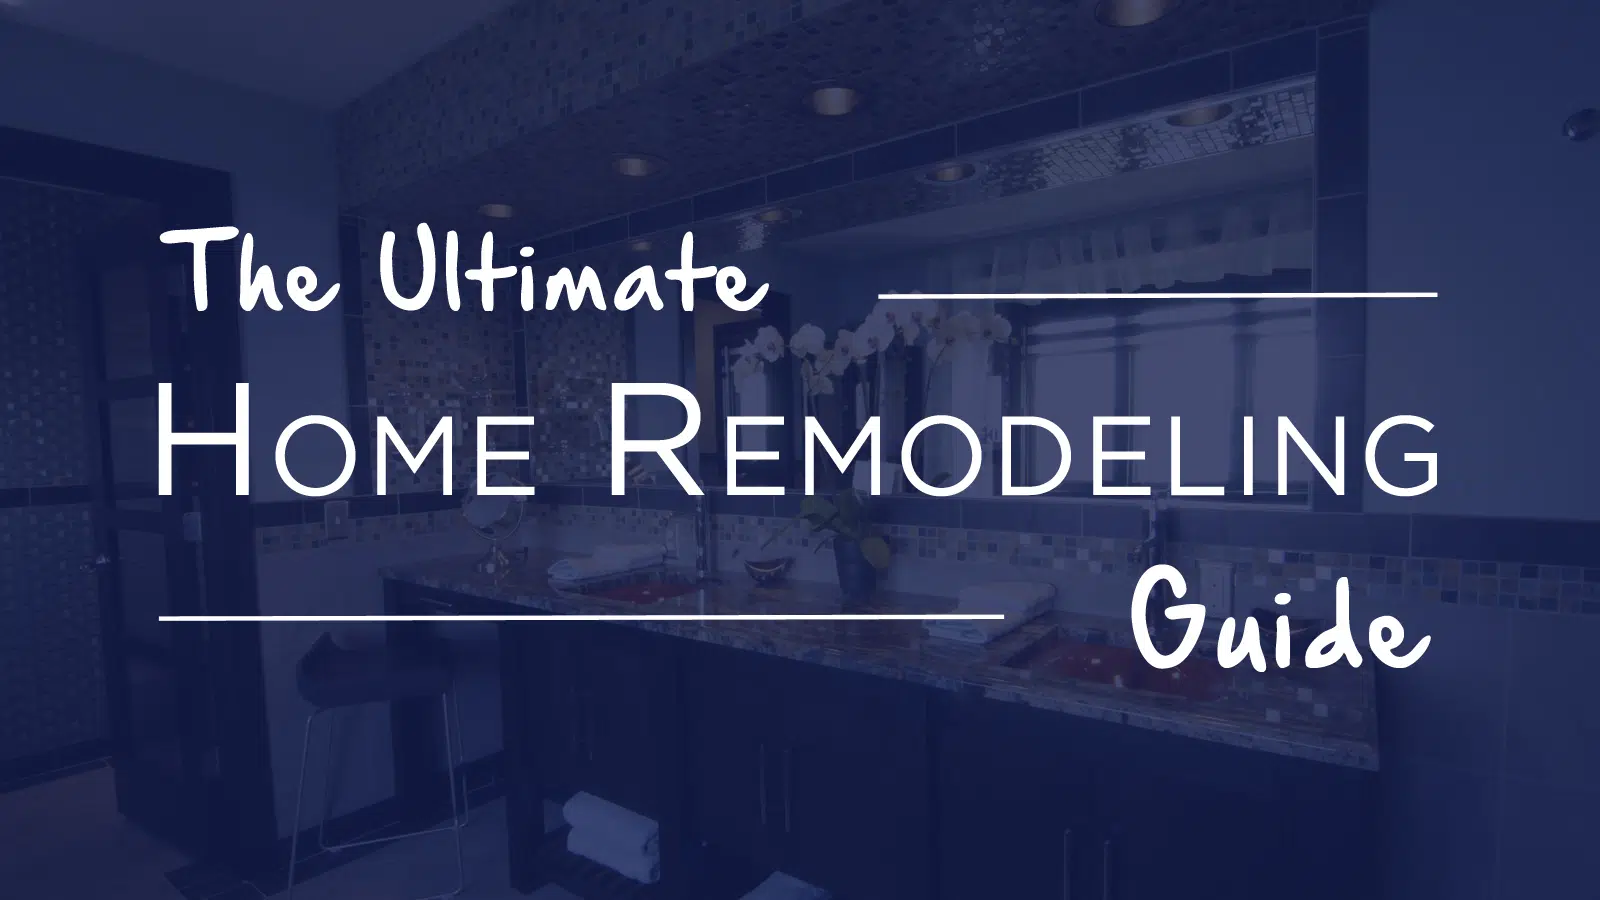 The Ultimate Home Remodeling Guide!